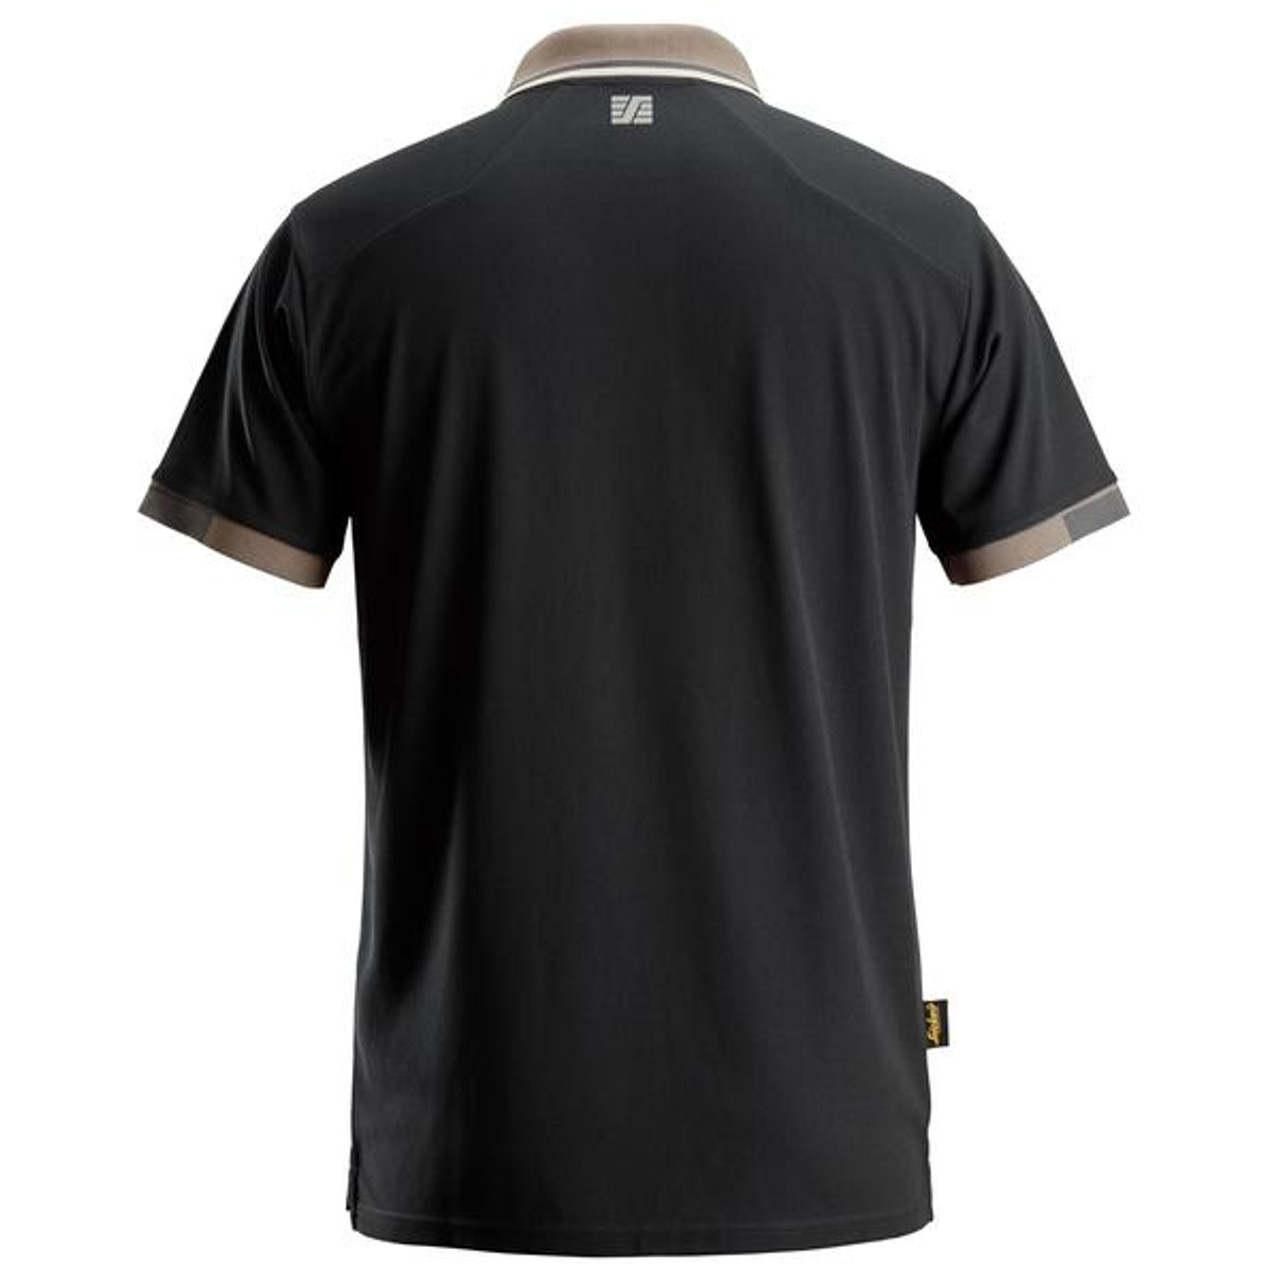 SNICKERS Polo Shirt | Melbourne Supplier of 2724 Black 37.5 Performance for Work Shirts, Golf Shirts, Branded Workwear, Work Uniforms and even Sailing.